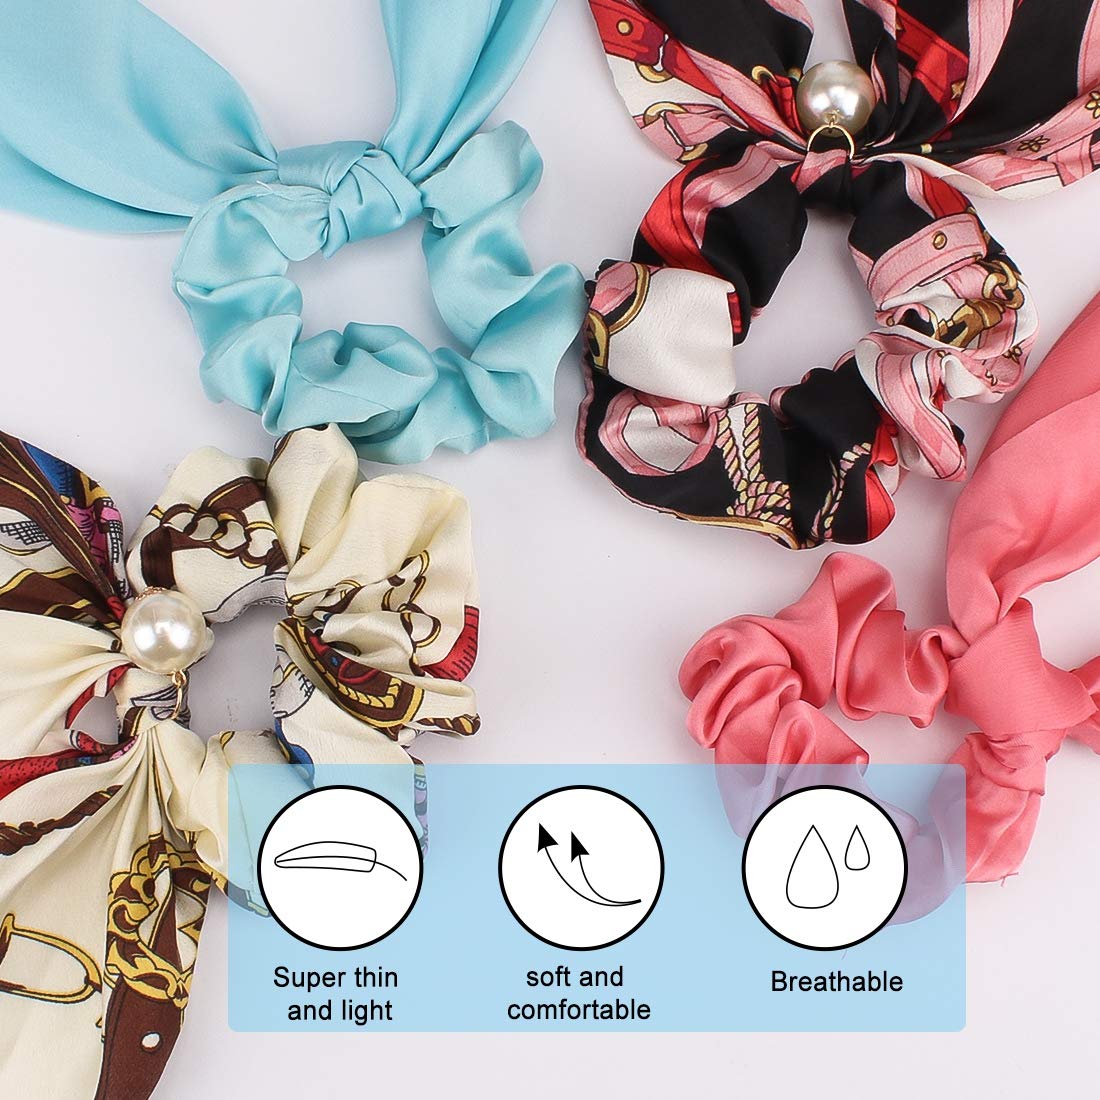 ANBALA Satin Ribbon Hair Scrunchies,10Pcs Bow Scarf Scrunchies, Thin Cold Scrunchies with Tail, Hair Ties Accessories for Girls Women Long Scrunchies Hair Scarves (5 Floral + 5 Solid Color Scrunchies)